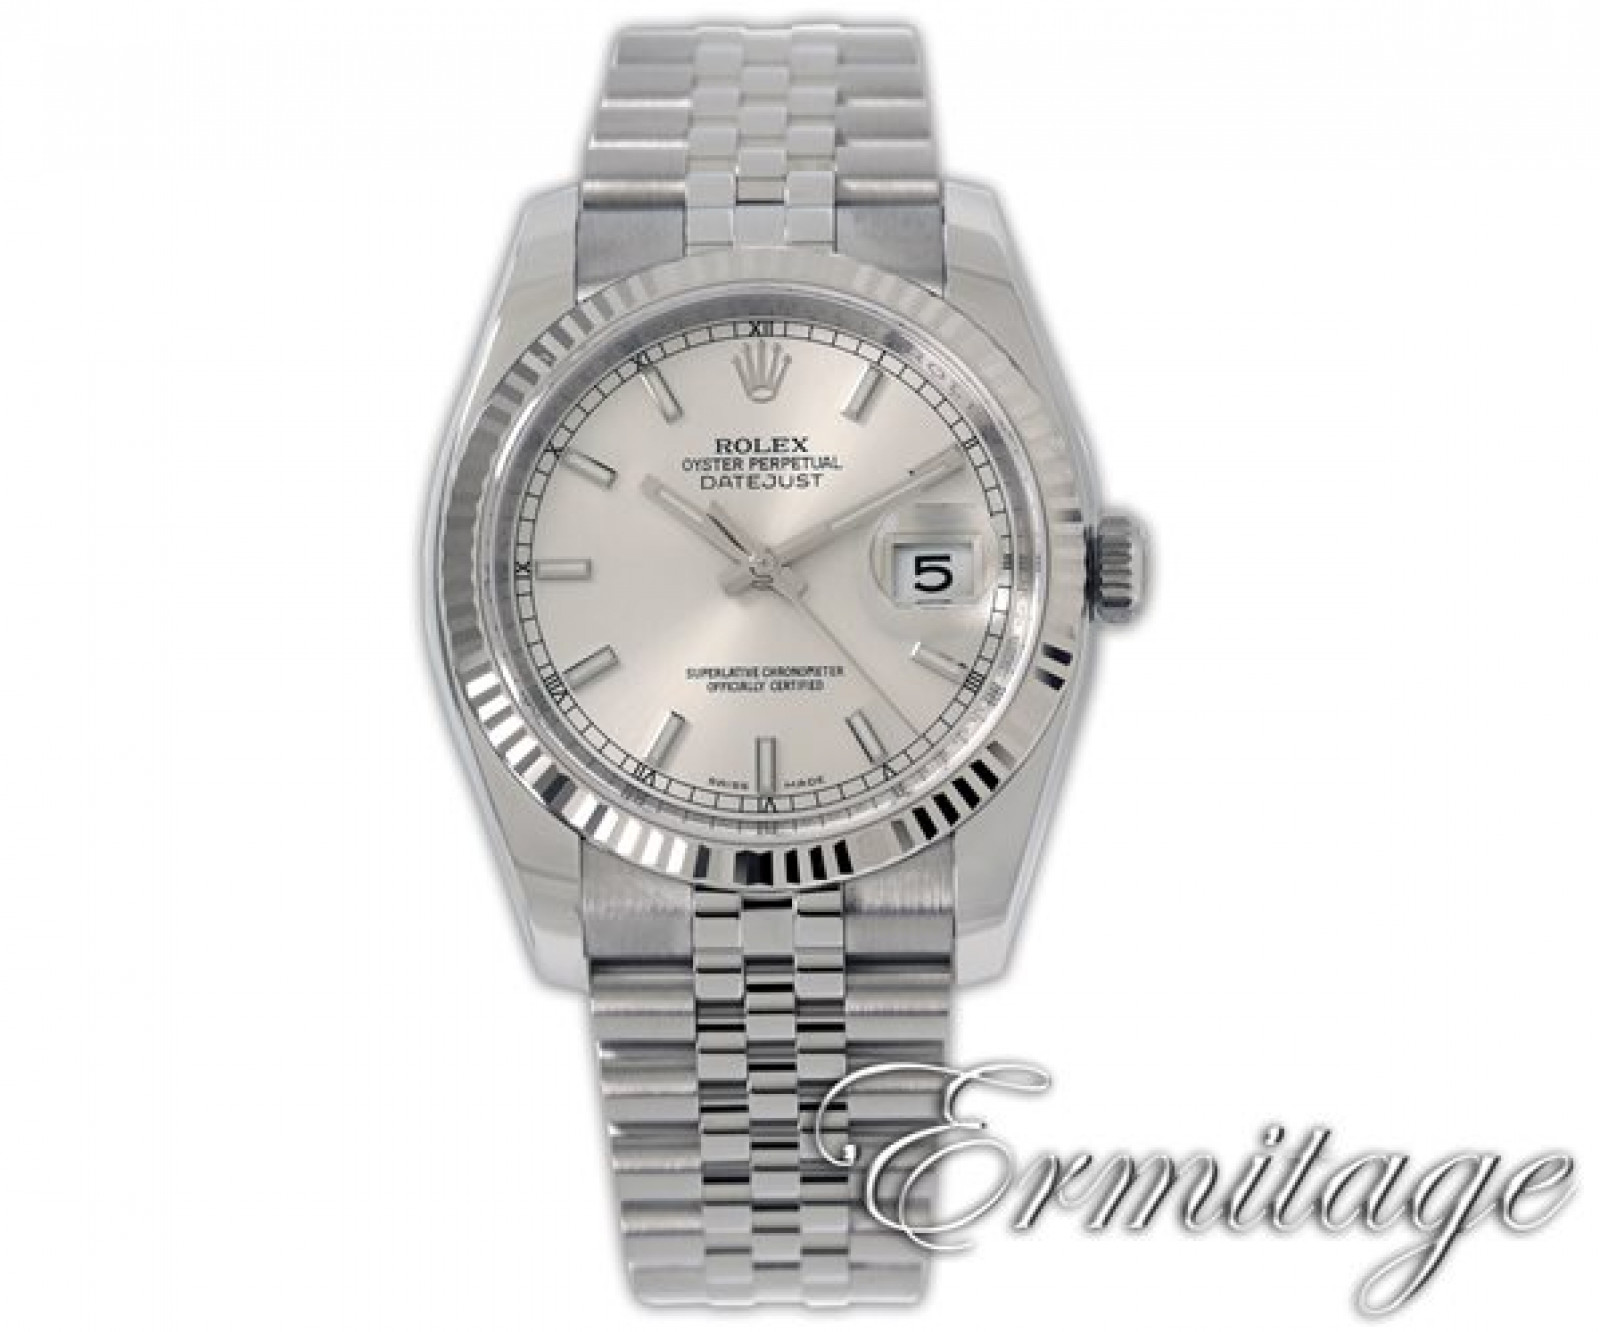 Men's Used Rolex Datejust 116234 Oyster Perpetual